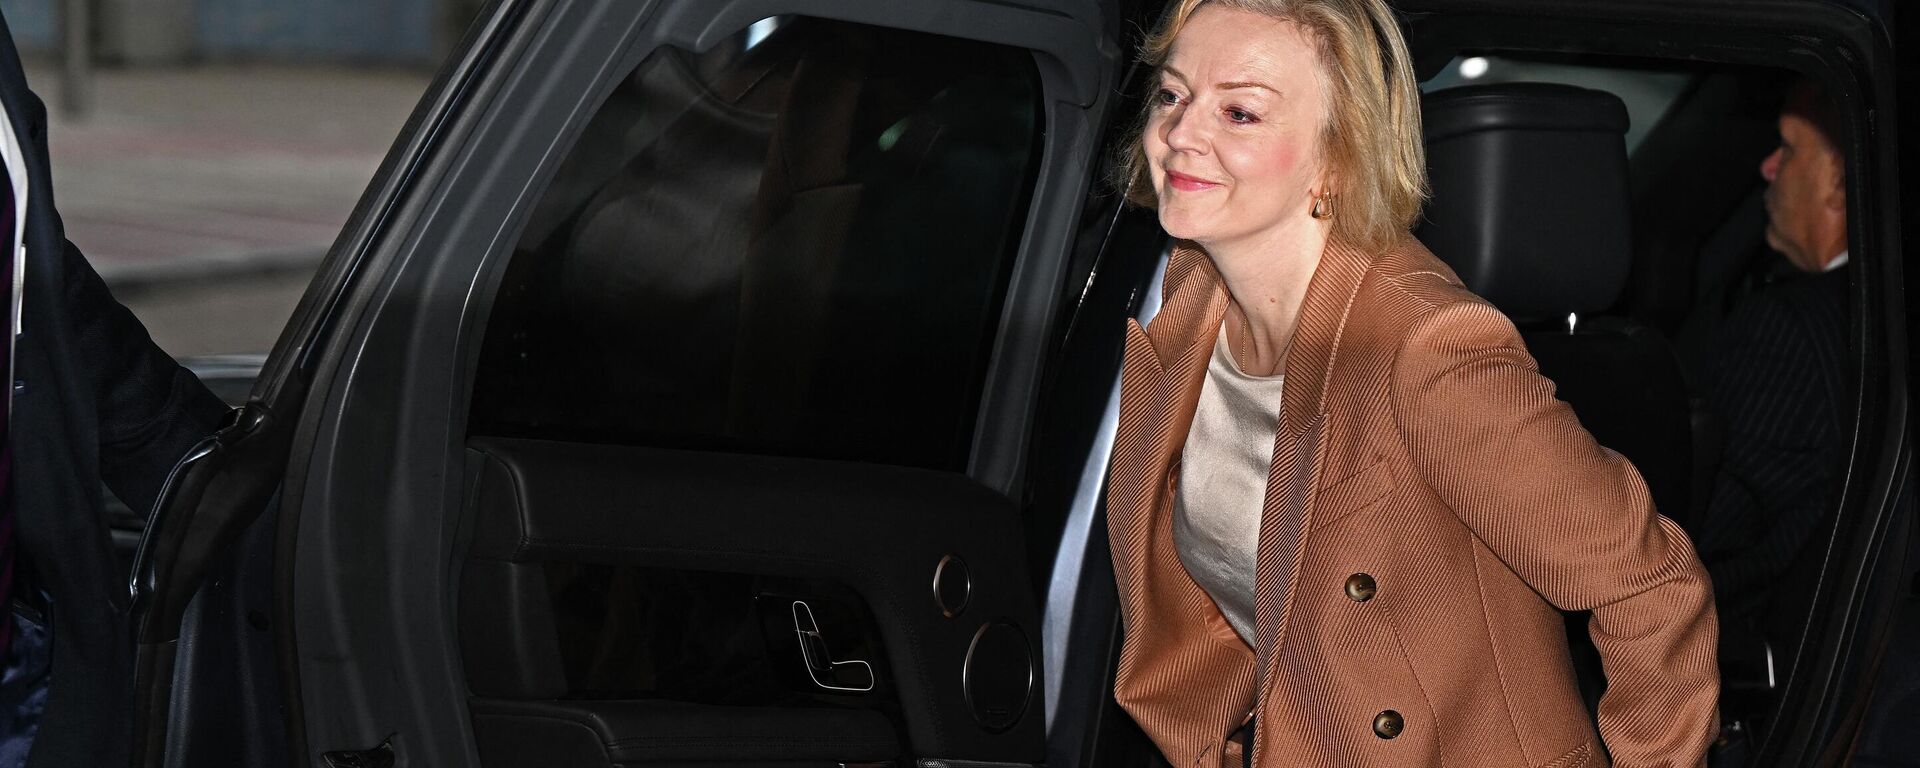 Britain's Prime Minister Liz Truss exits a car as she arrives back at her hotel on the third day of the annual Conservative Party Conference in Birmingham, central England, on October 4, 2022 - Sputnik International, 1920, 06.10.2022